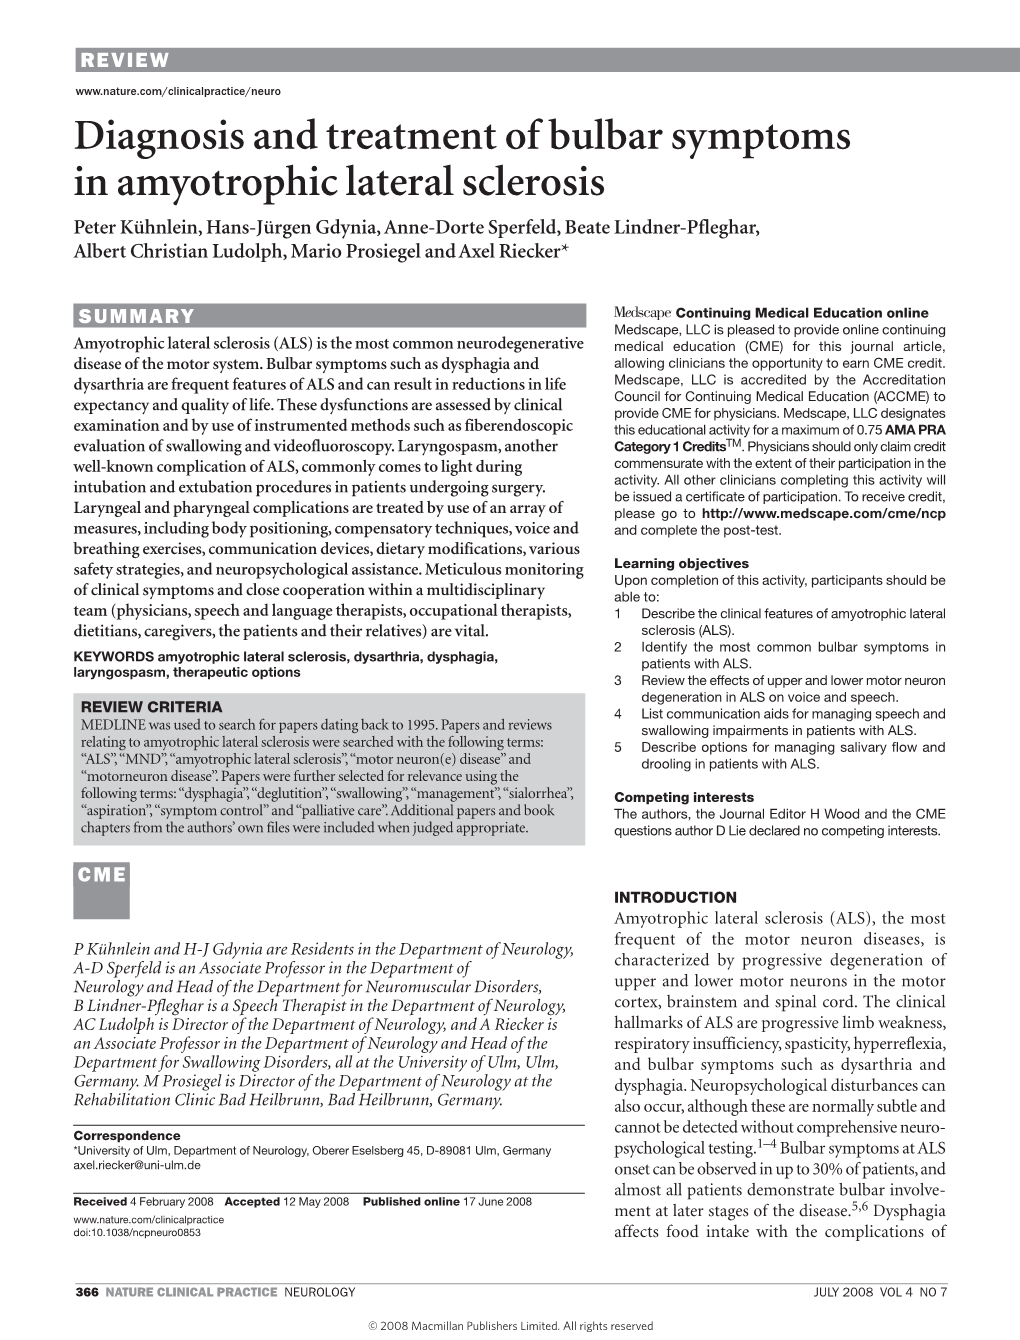 Diagnosis and Treatment of Bulbar Symptoms in Amyotrophic Lateral